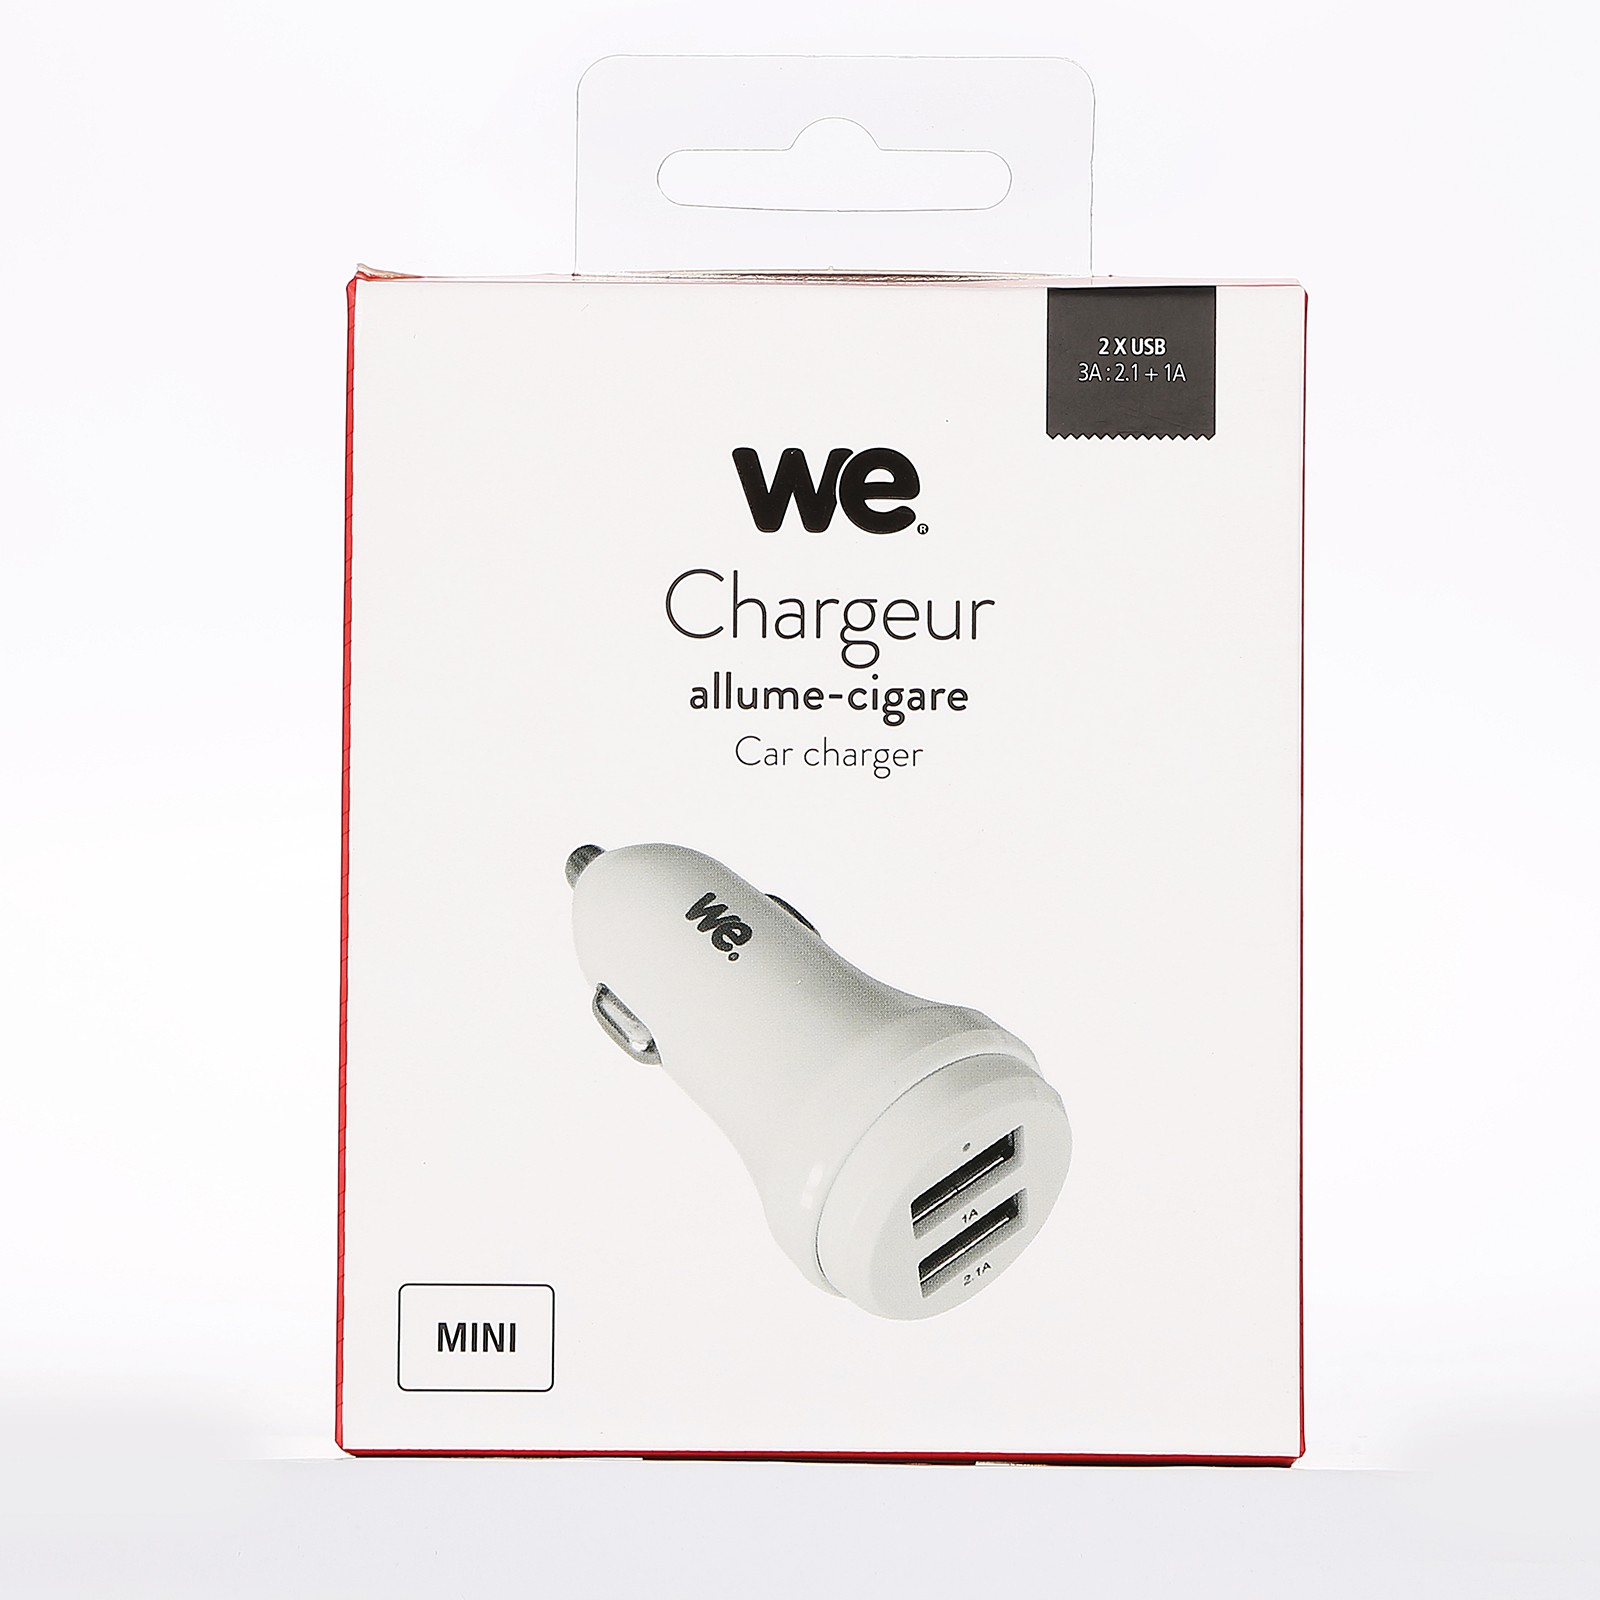 Chargeur allume-cigare WE - 2 ports USB (1 USB-A 5V/2,4A et 1 USB